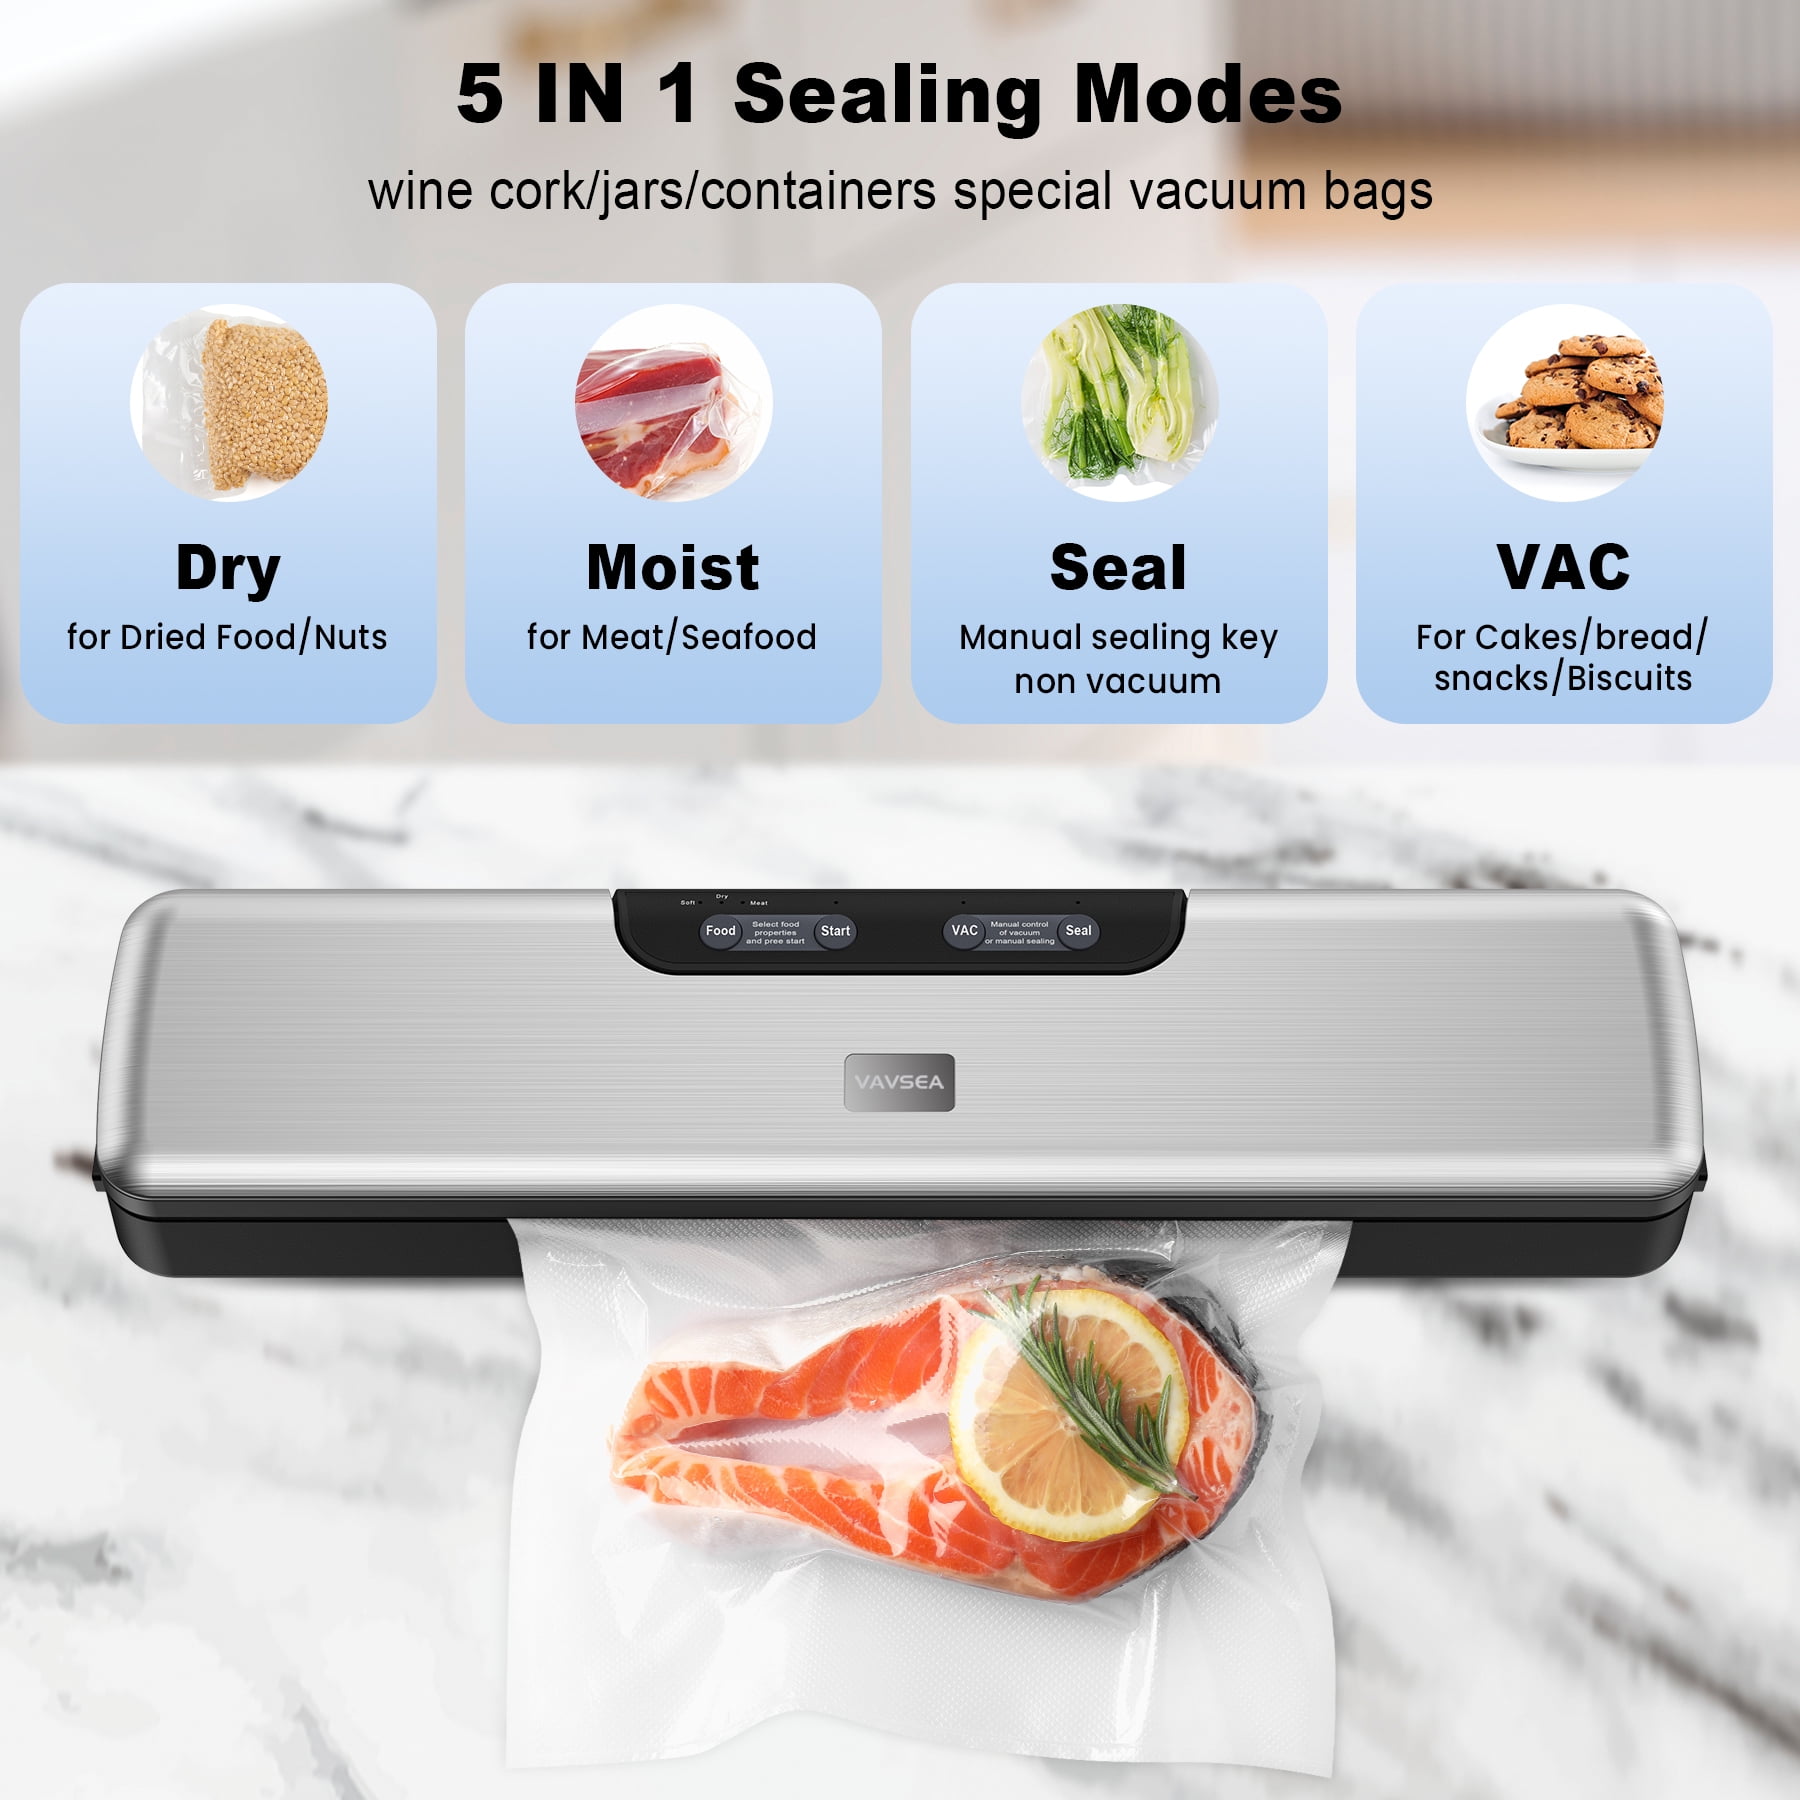  ADVENOR Vacuum Sealer Pro Food Sealer with Built-in Cutter and  Bag Storage Includes 2 Bag Rolls 8x16'and 11x16' Handle Lock Design 90kpa  Double Heat Seal For Food Preservation: Home & Kitchen